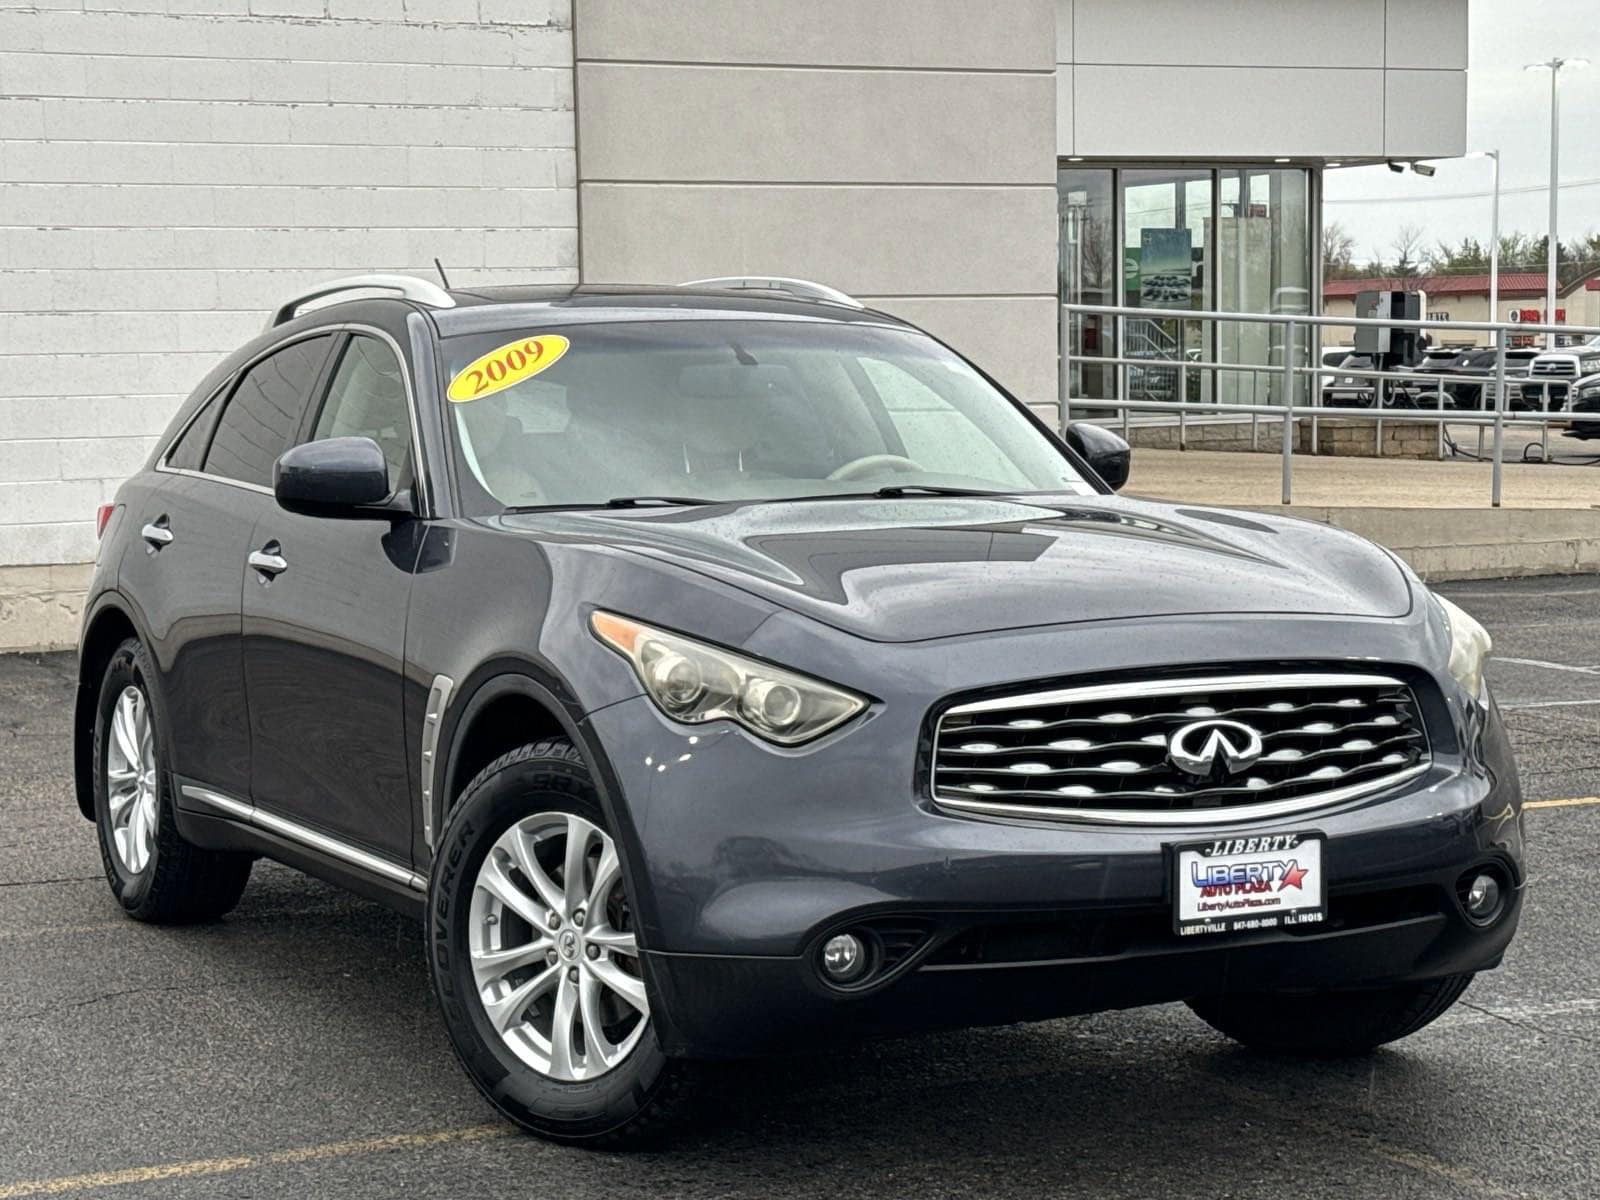 Used 2009 INFINITI FX 35 with VIN JNRAS18W09M151004 for sale in Libertyville, IL